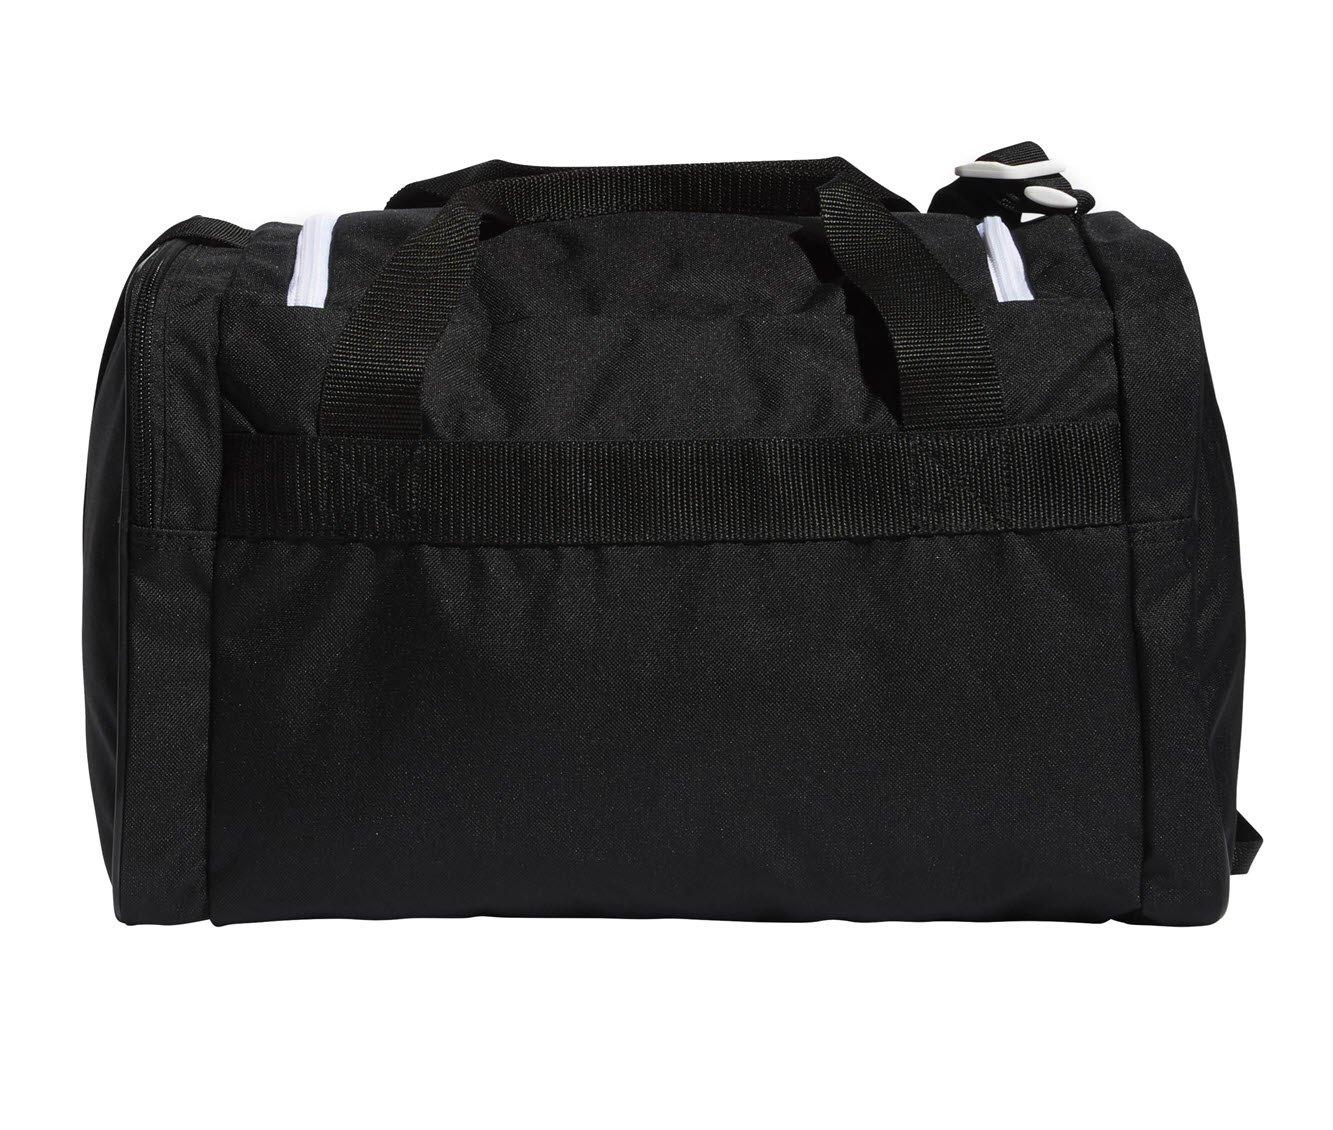 Find Bestsellers Adidas Court Lite Duffel Bag less expensive